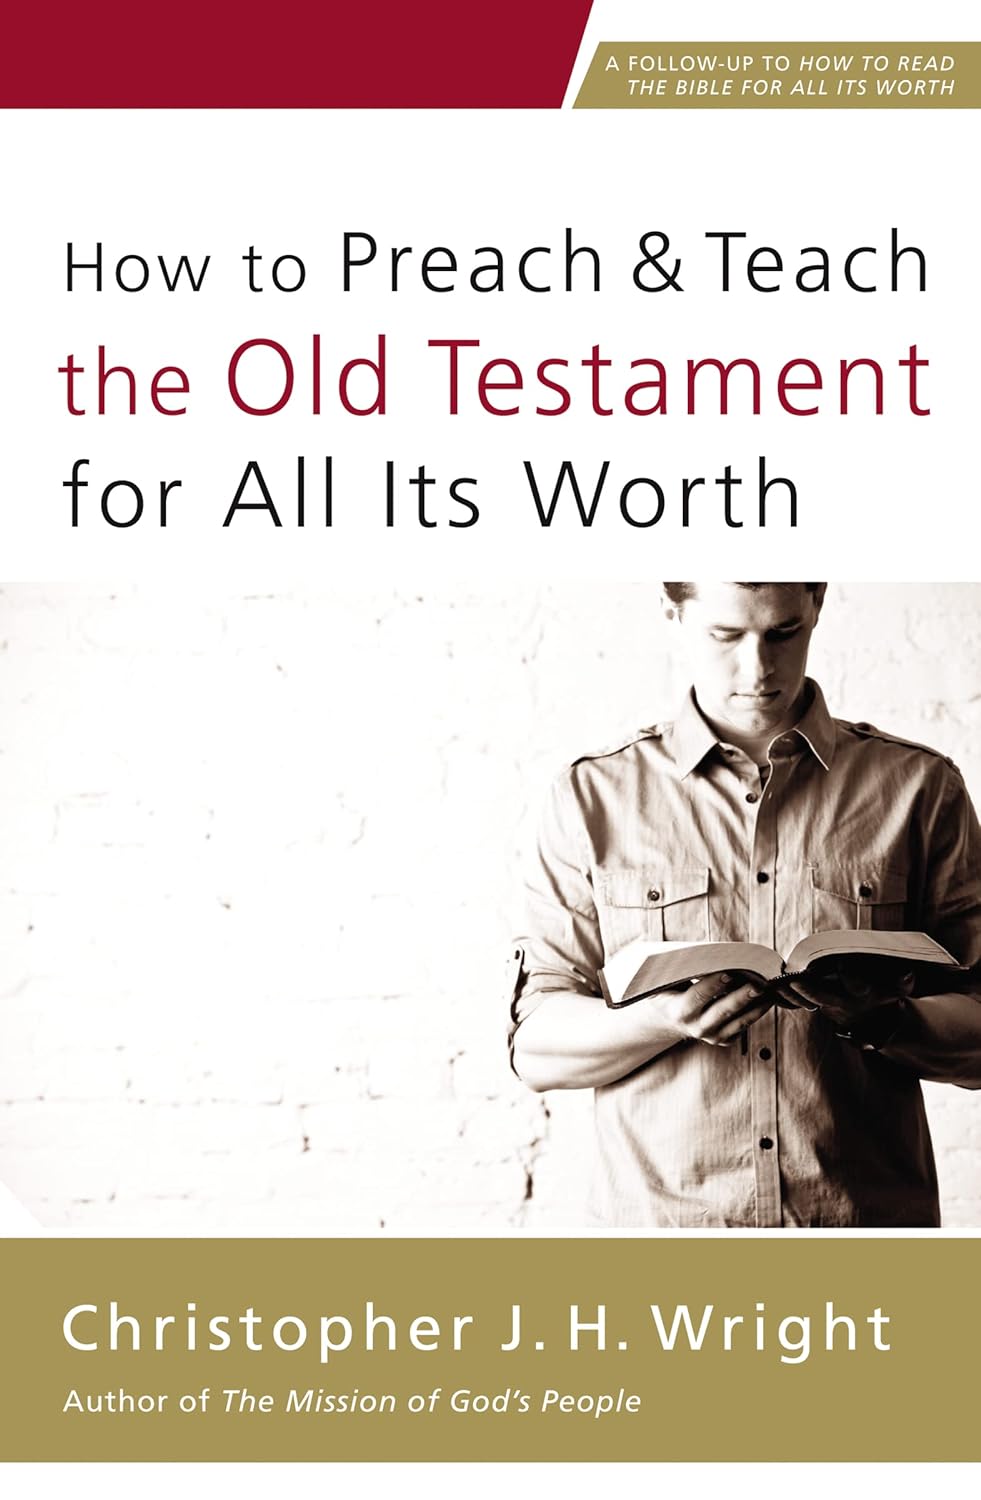 How To Preach And Teach The Old Testament For All Its Worth - Christopher J. H. Wright